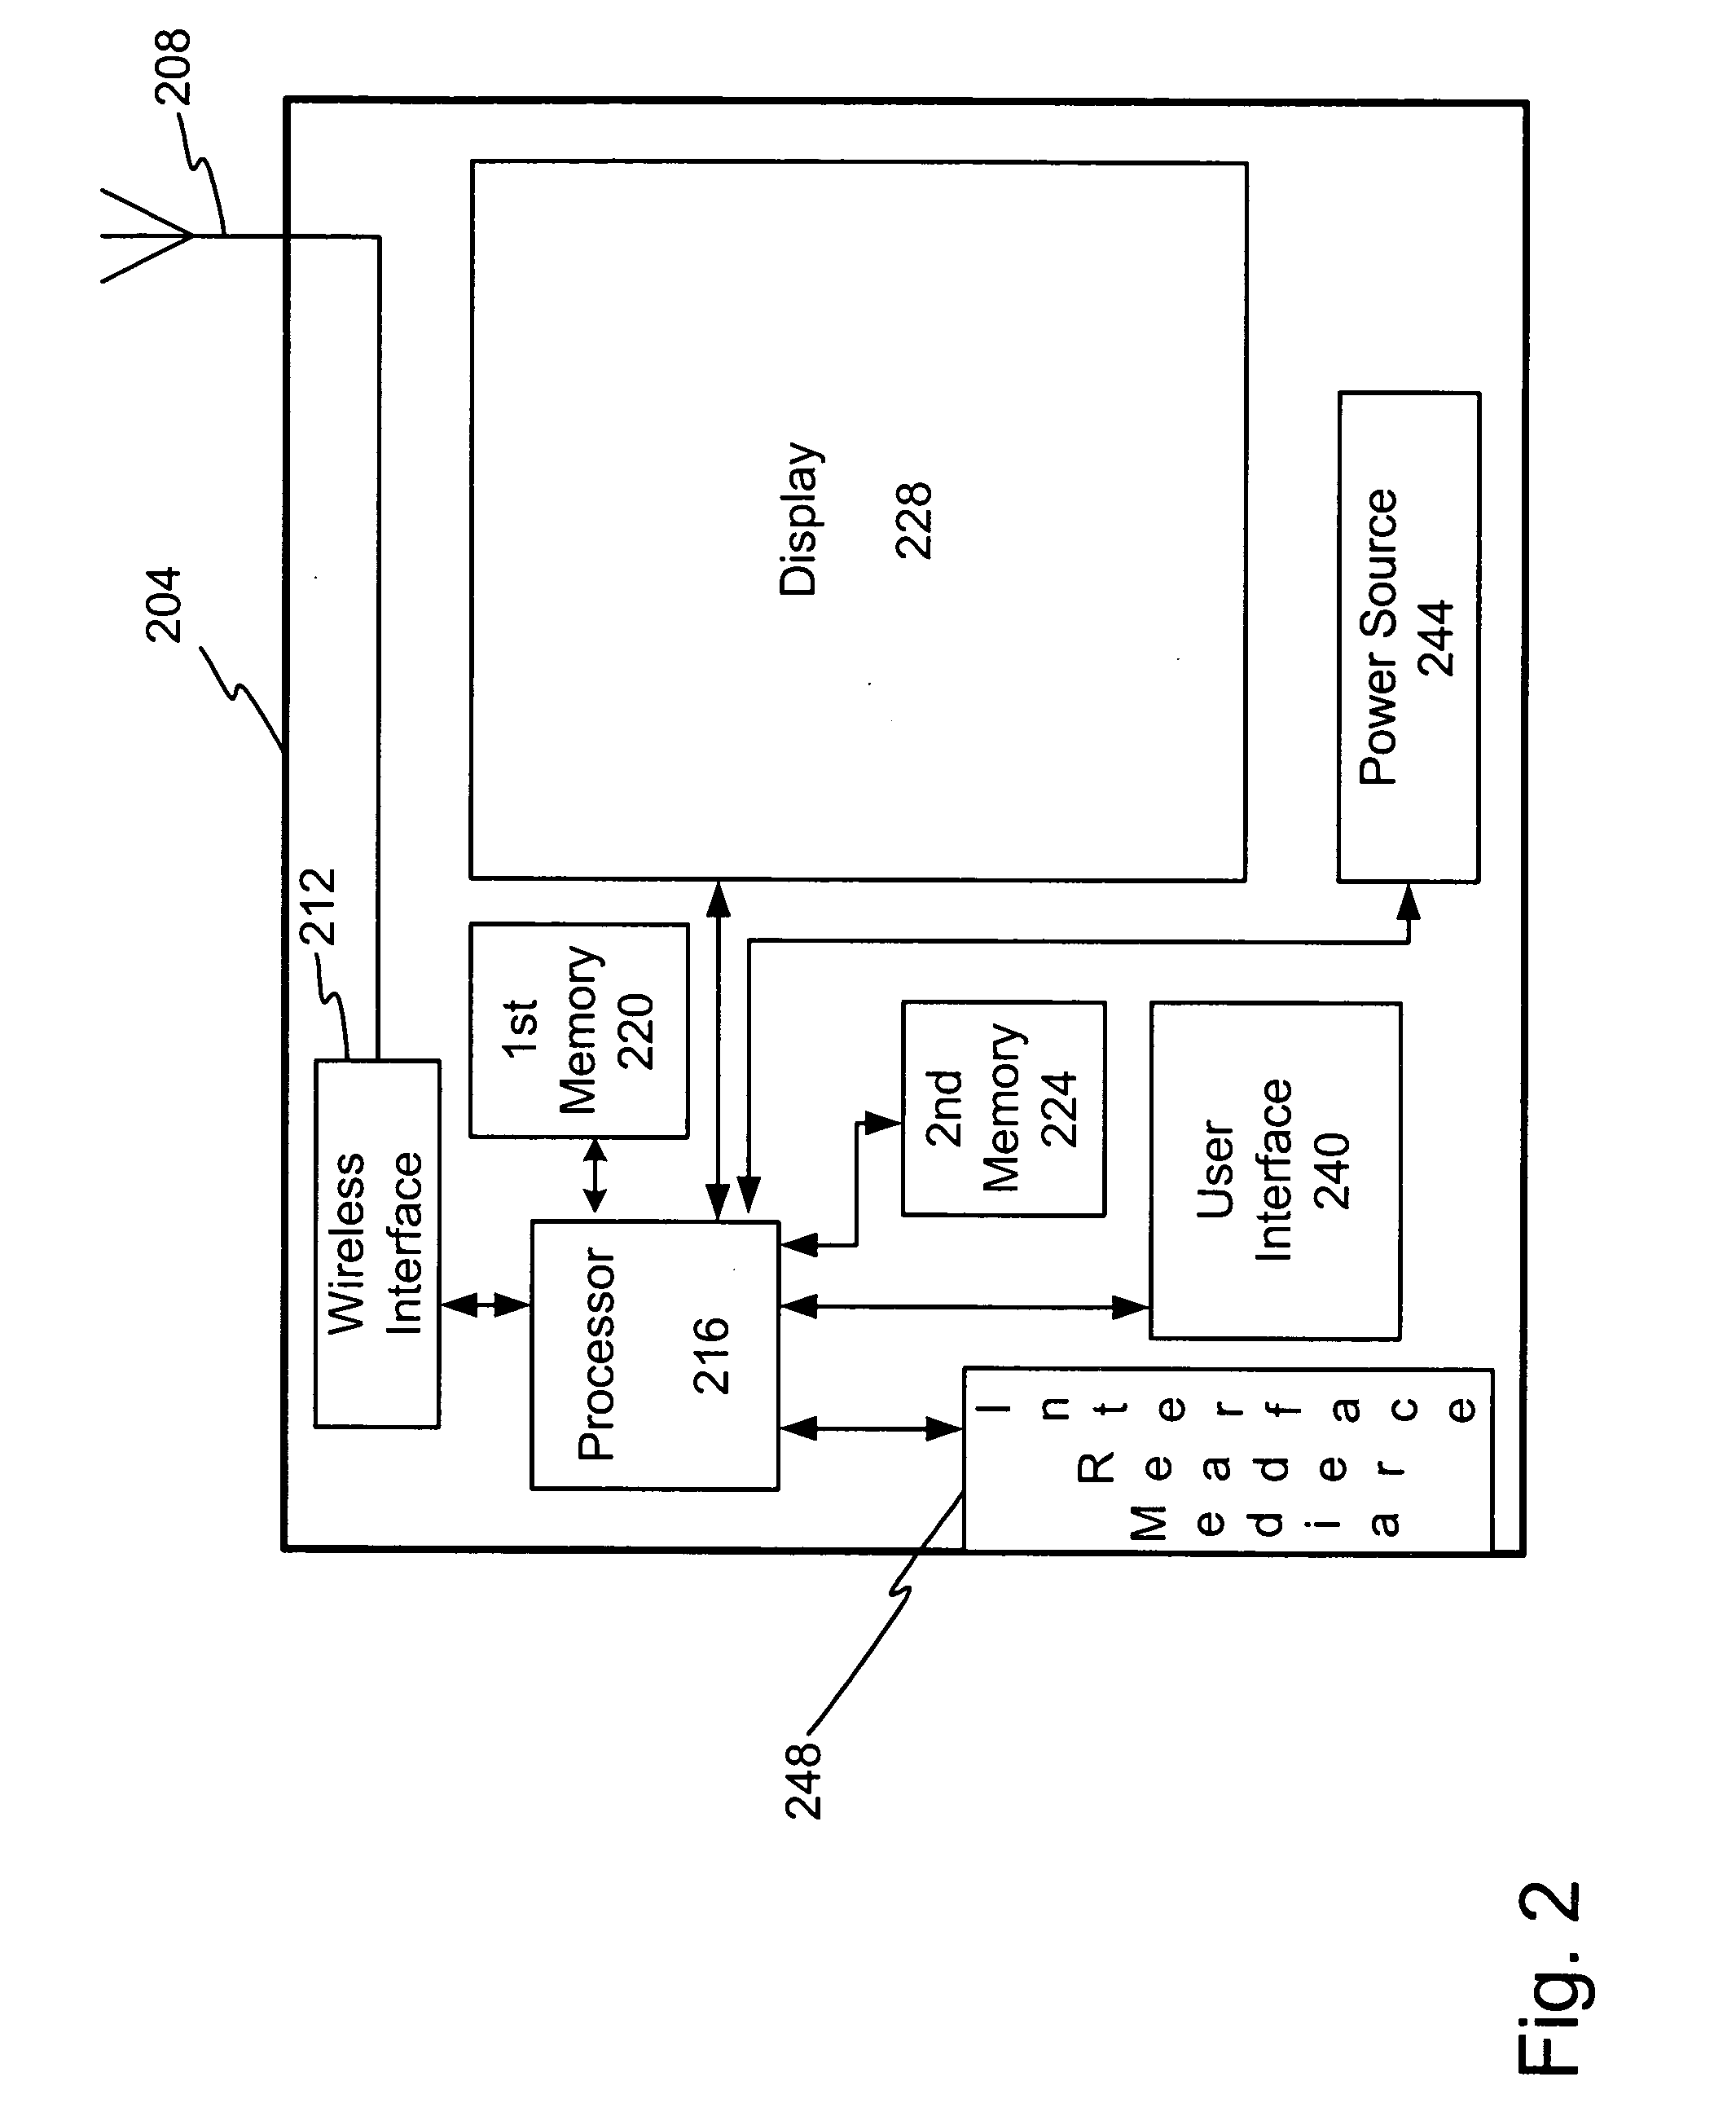 Portable data communication device with server interface